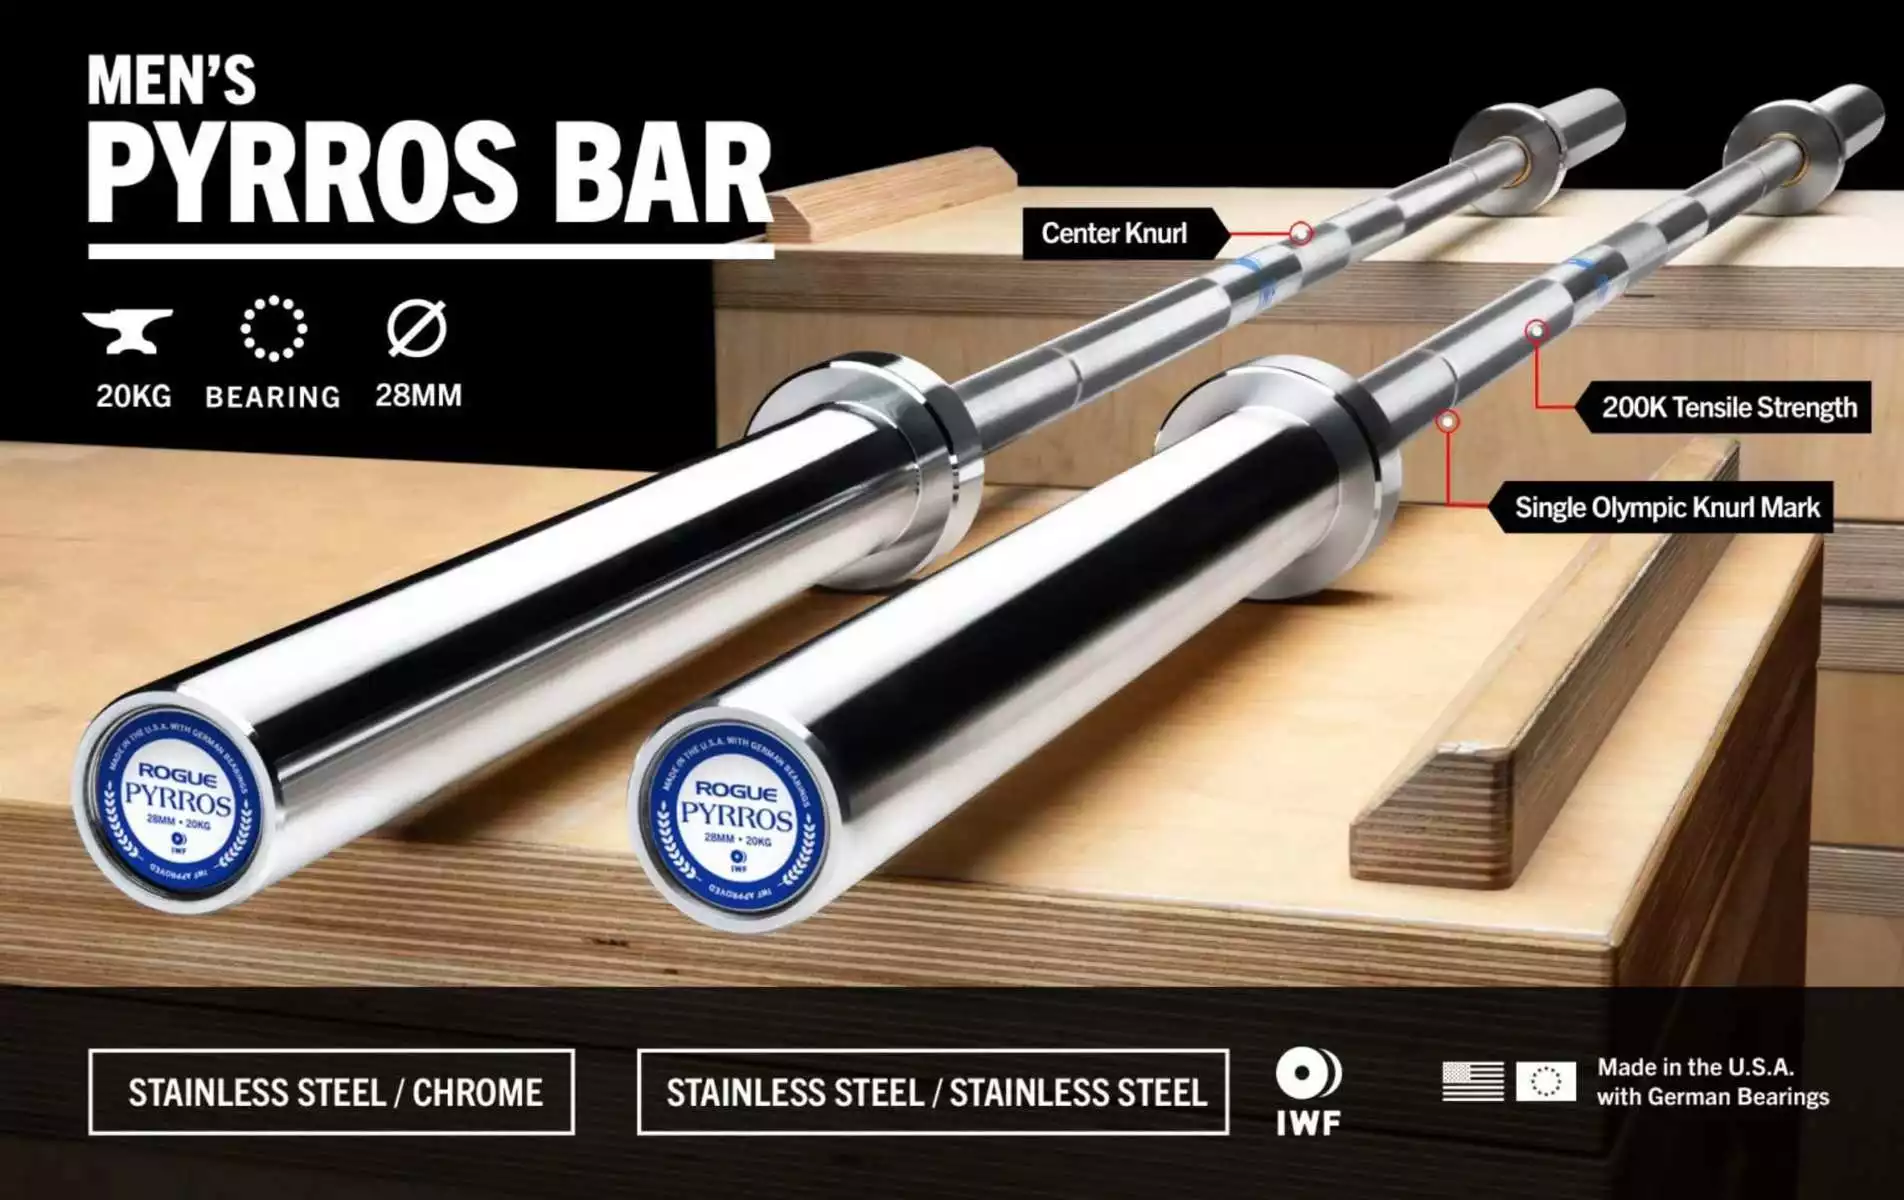 Rogue Pyrros Bar – Stainless Steel